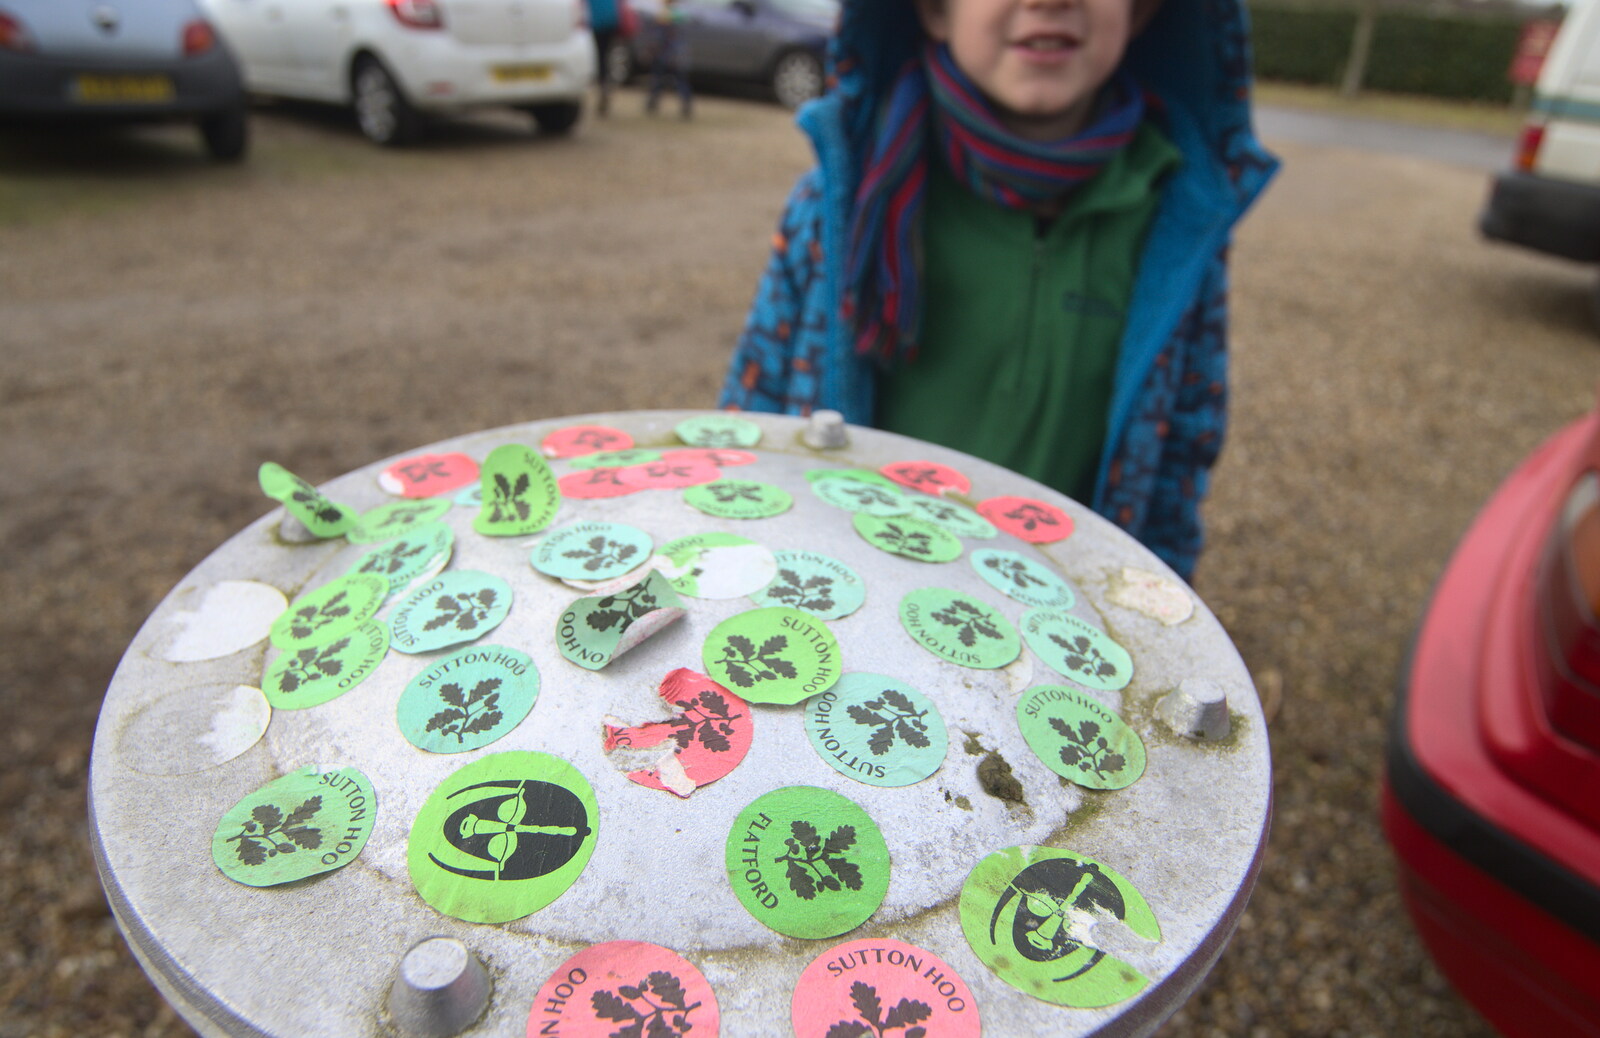 A bollard is covered in stickers from A Trip to Sutton Hoo, Woodbridge, Suffolk - 29th January 2017